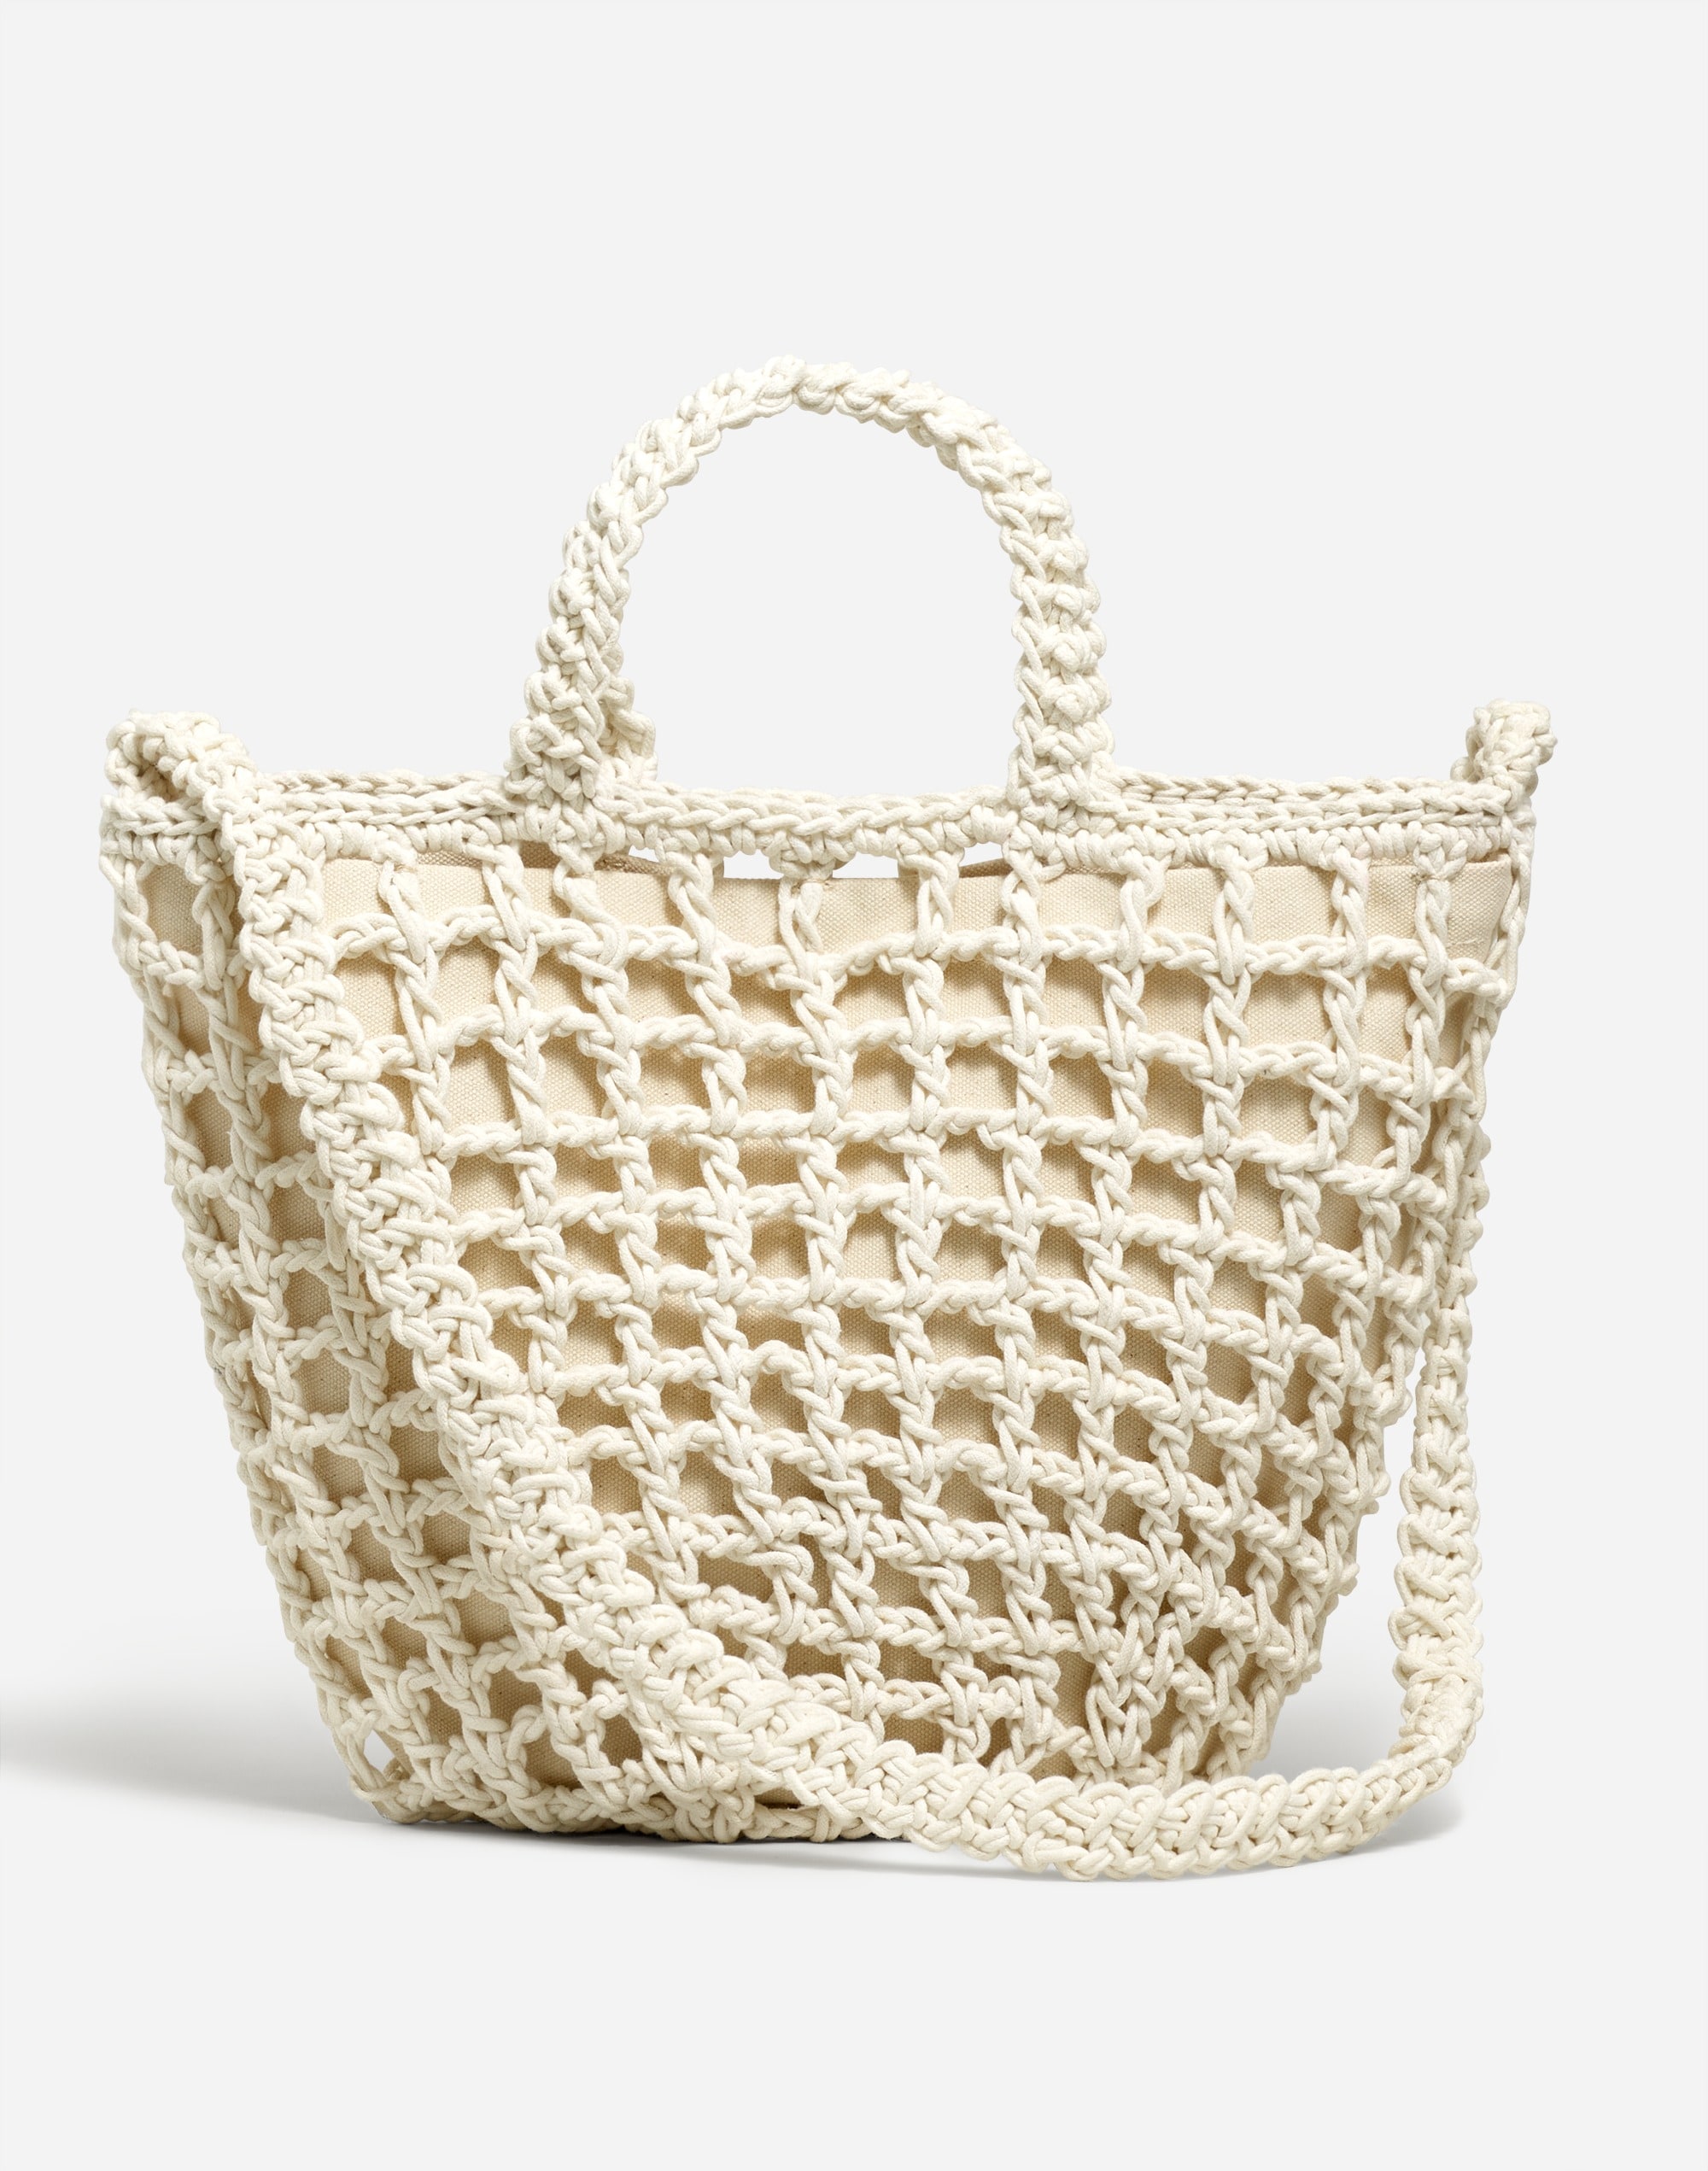 Mw The Crocheted Shoulder Bag In Antique Cream